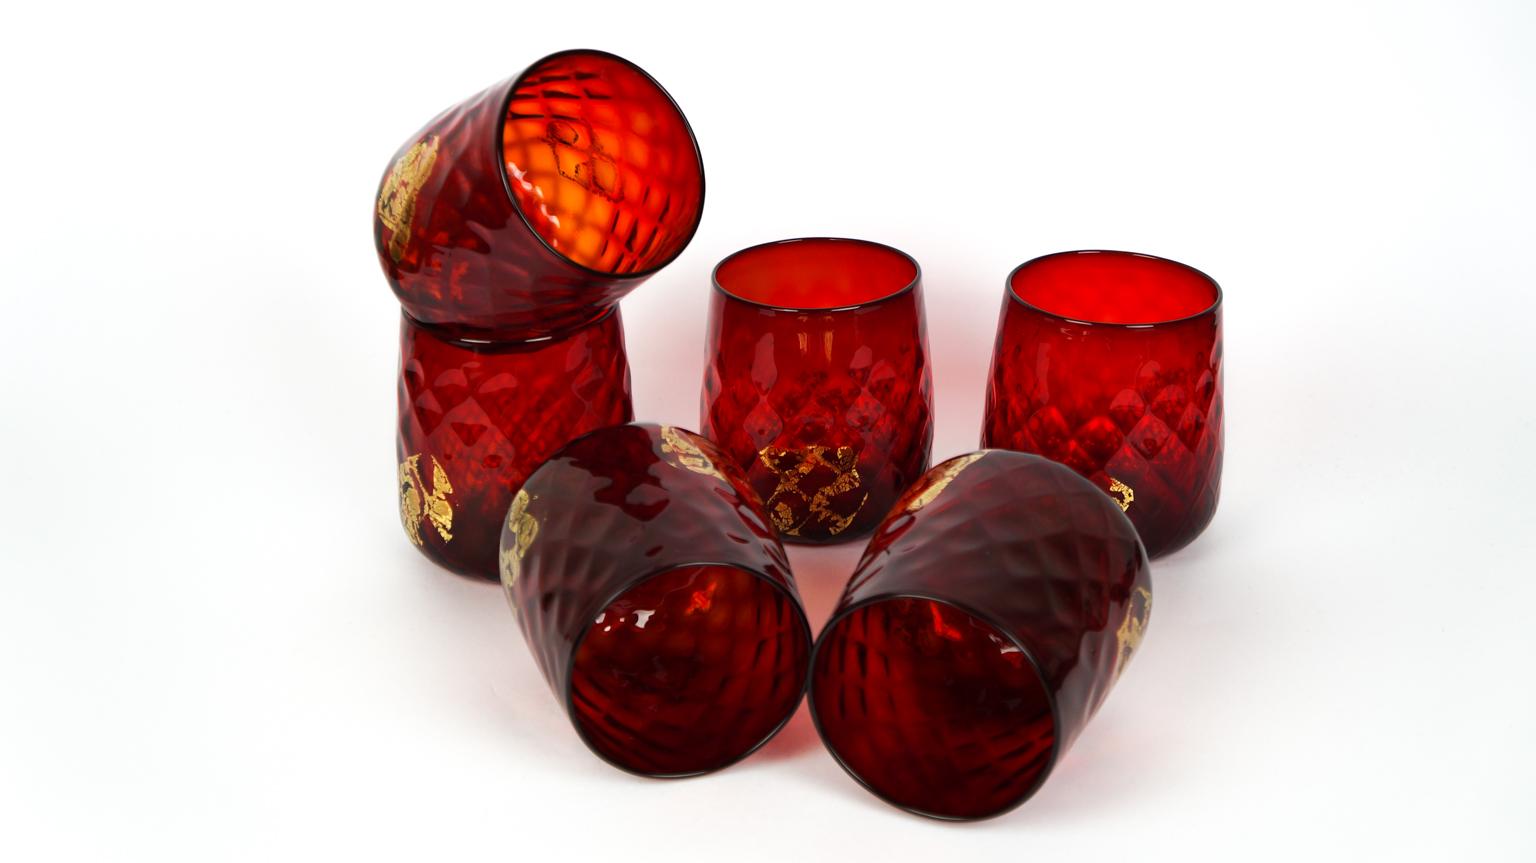 Luxury is a set composed of 6 glasses for water or wine in Murano glass entirely handmade in red color with 24-karat gold leaf details. 

This set is a combination of design and elegance, every single detail is worked with great care and